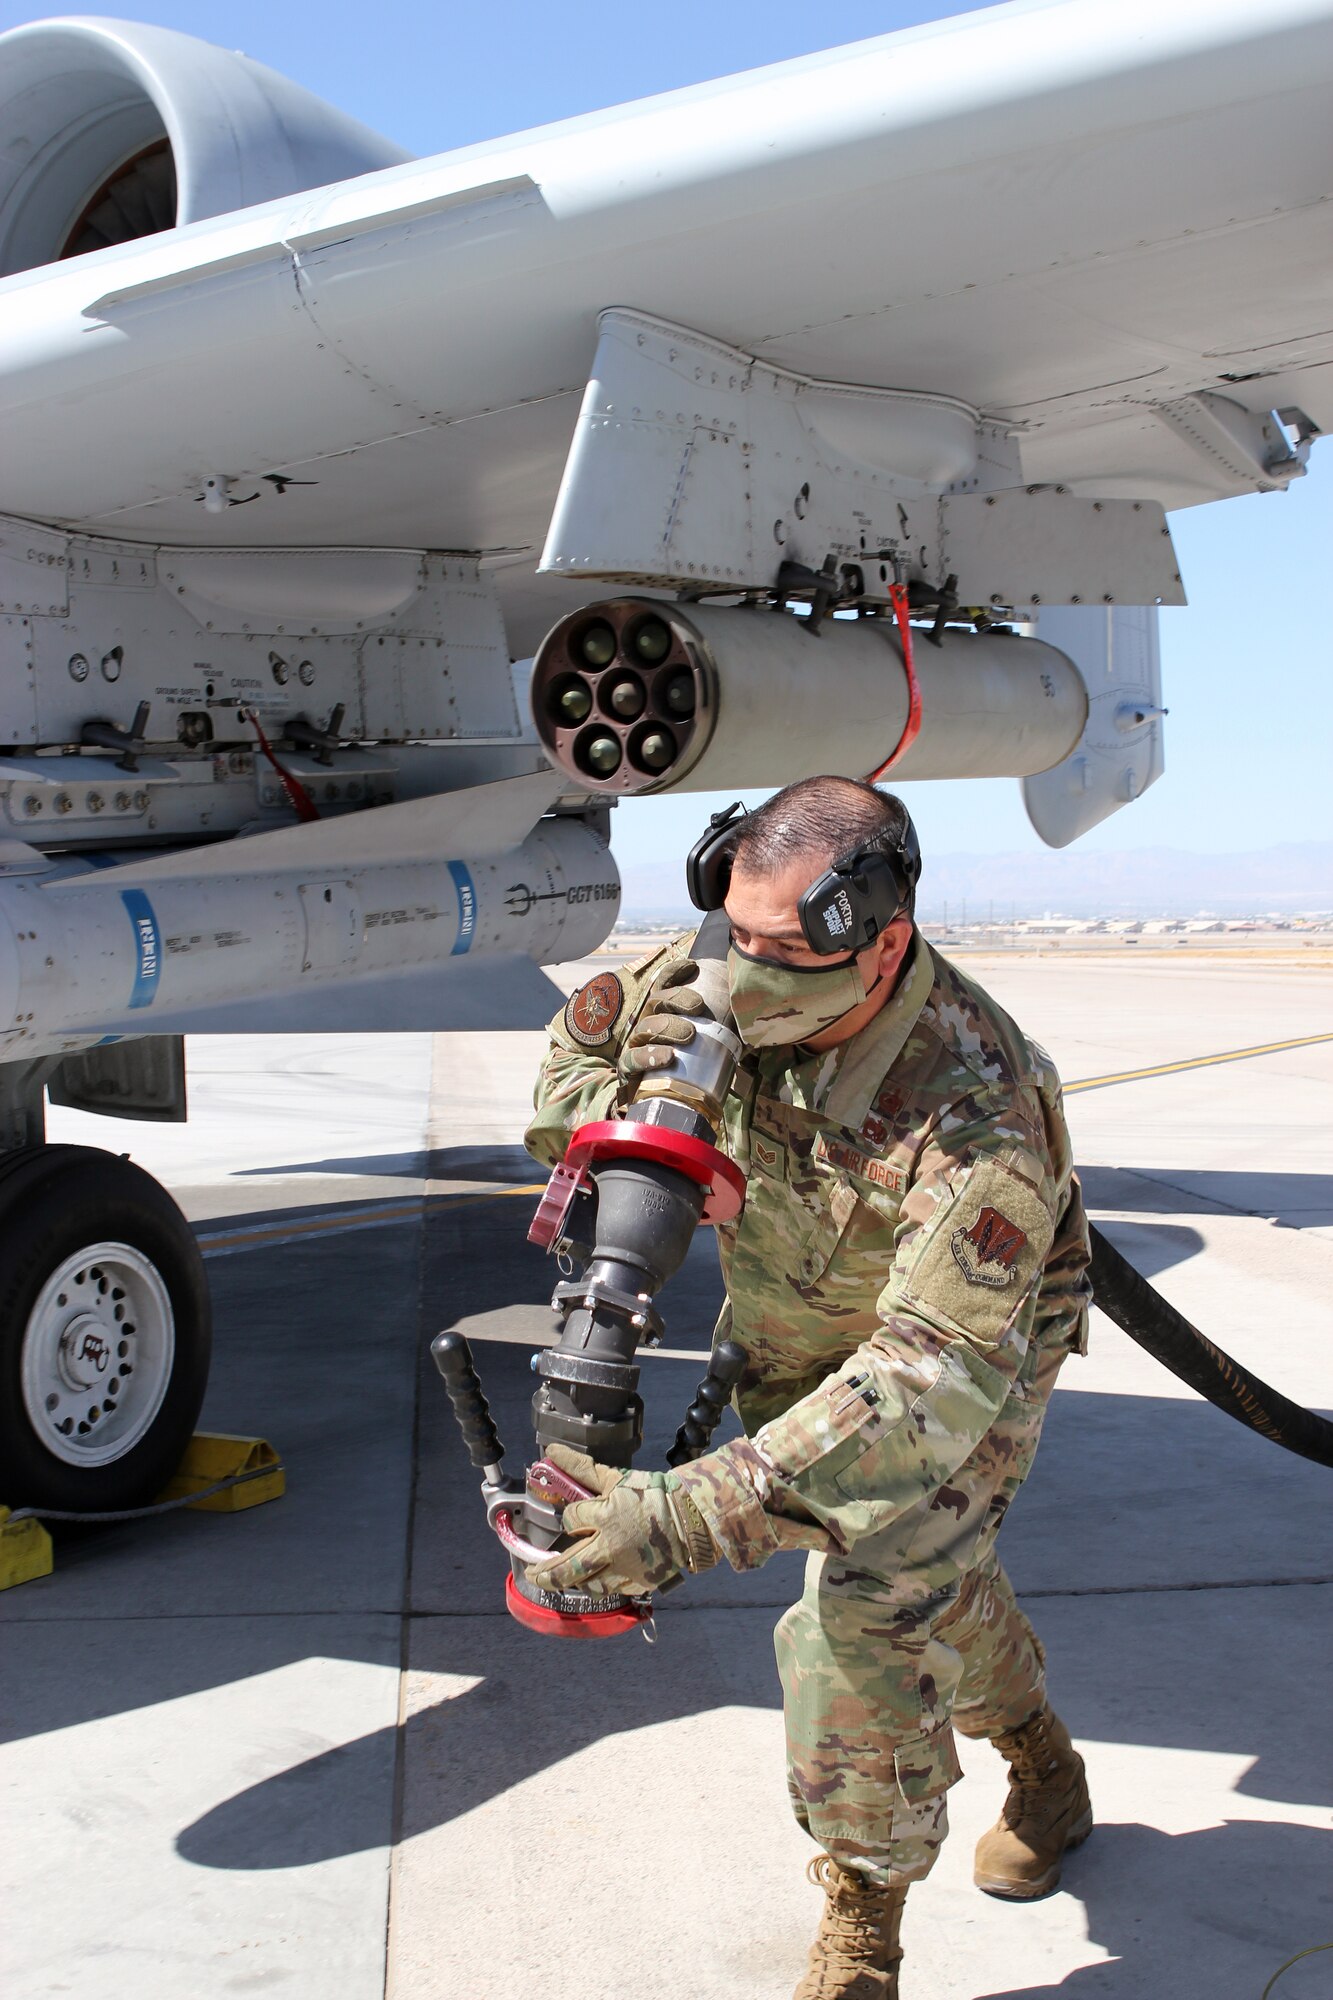 Staff Sgt. Robert Porter, a fuels specialist with the 127th Logistics Readiness Squadron, 127th Wing, supports A-10 Thunderbolt II aircraft operations at Nellis Air Force Base, Nevada, April 12, 2021.